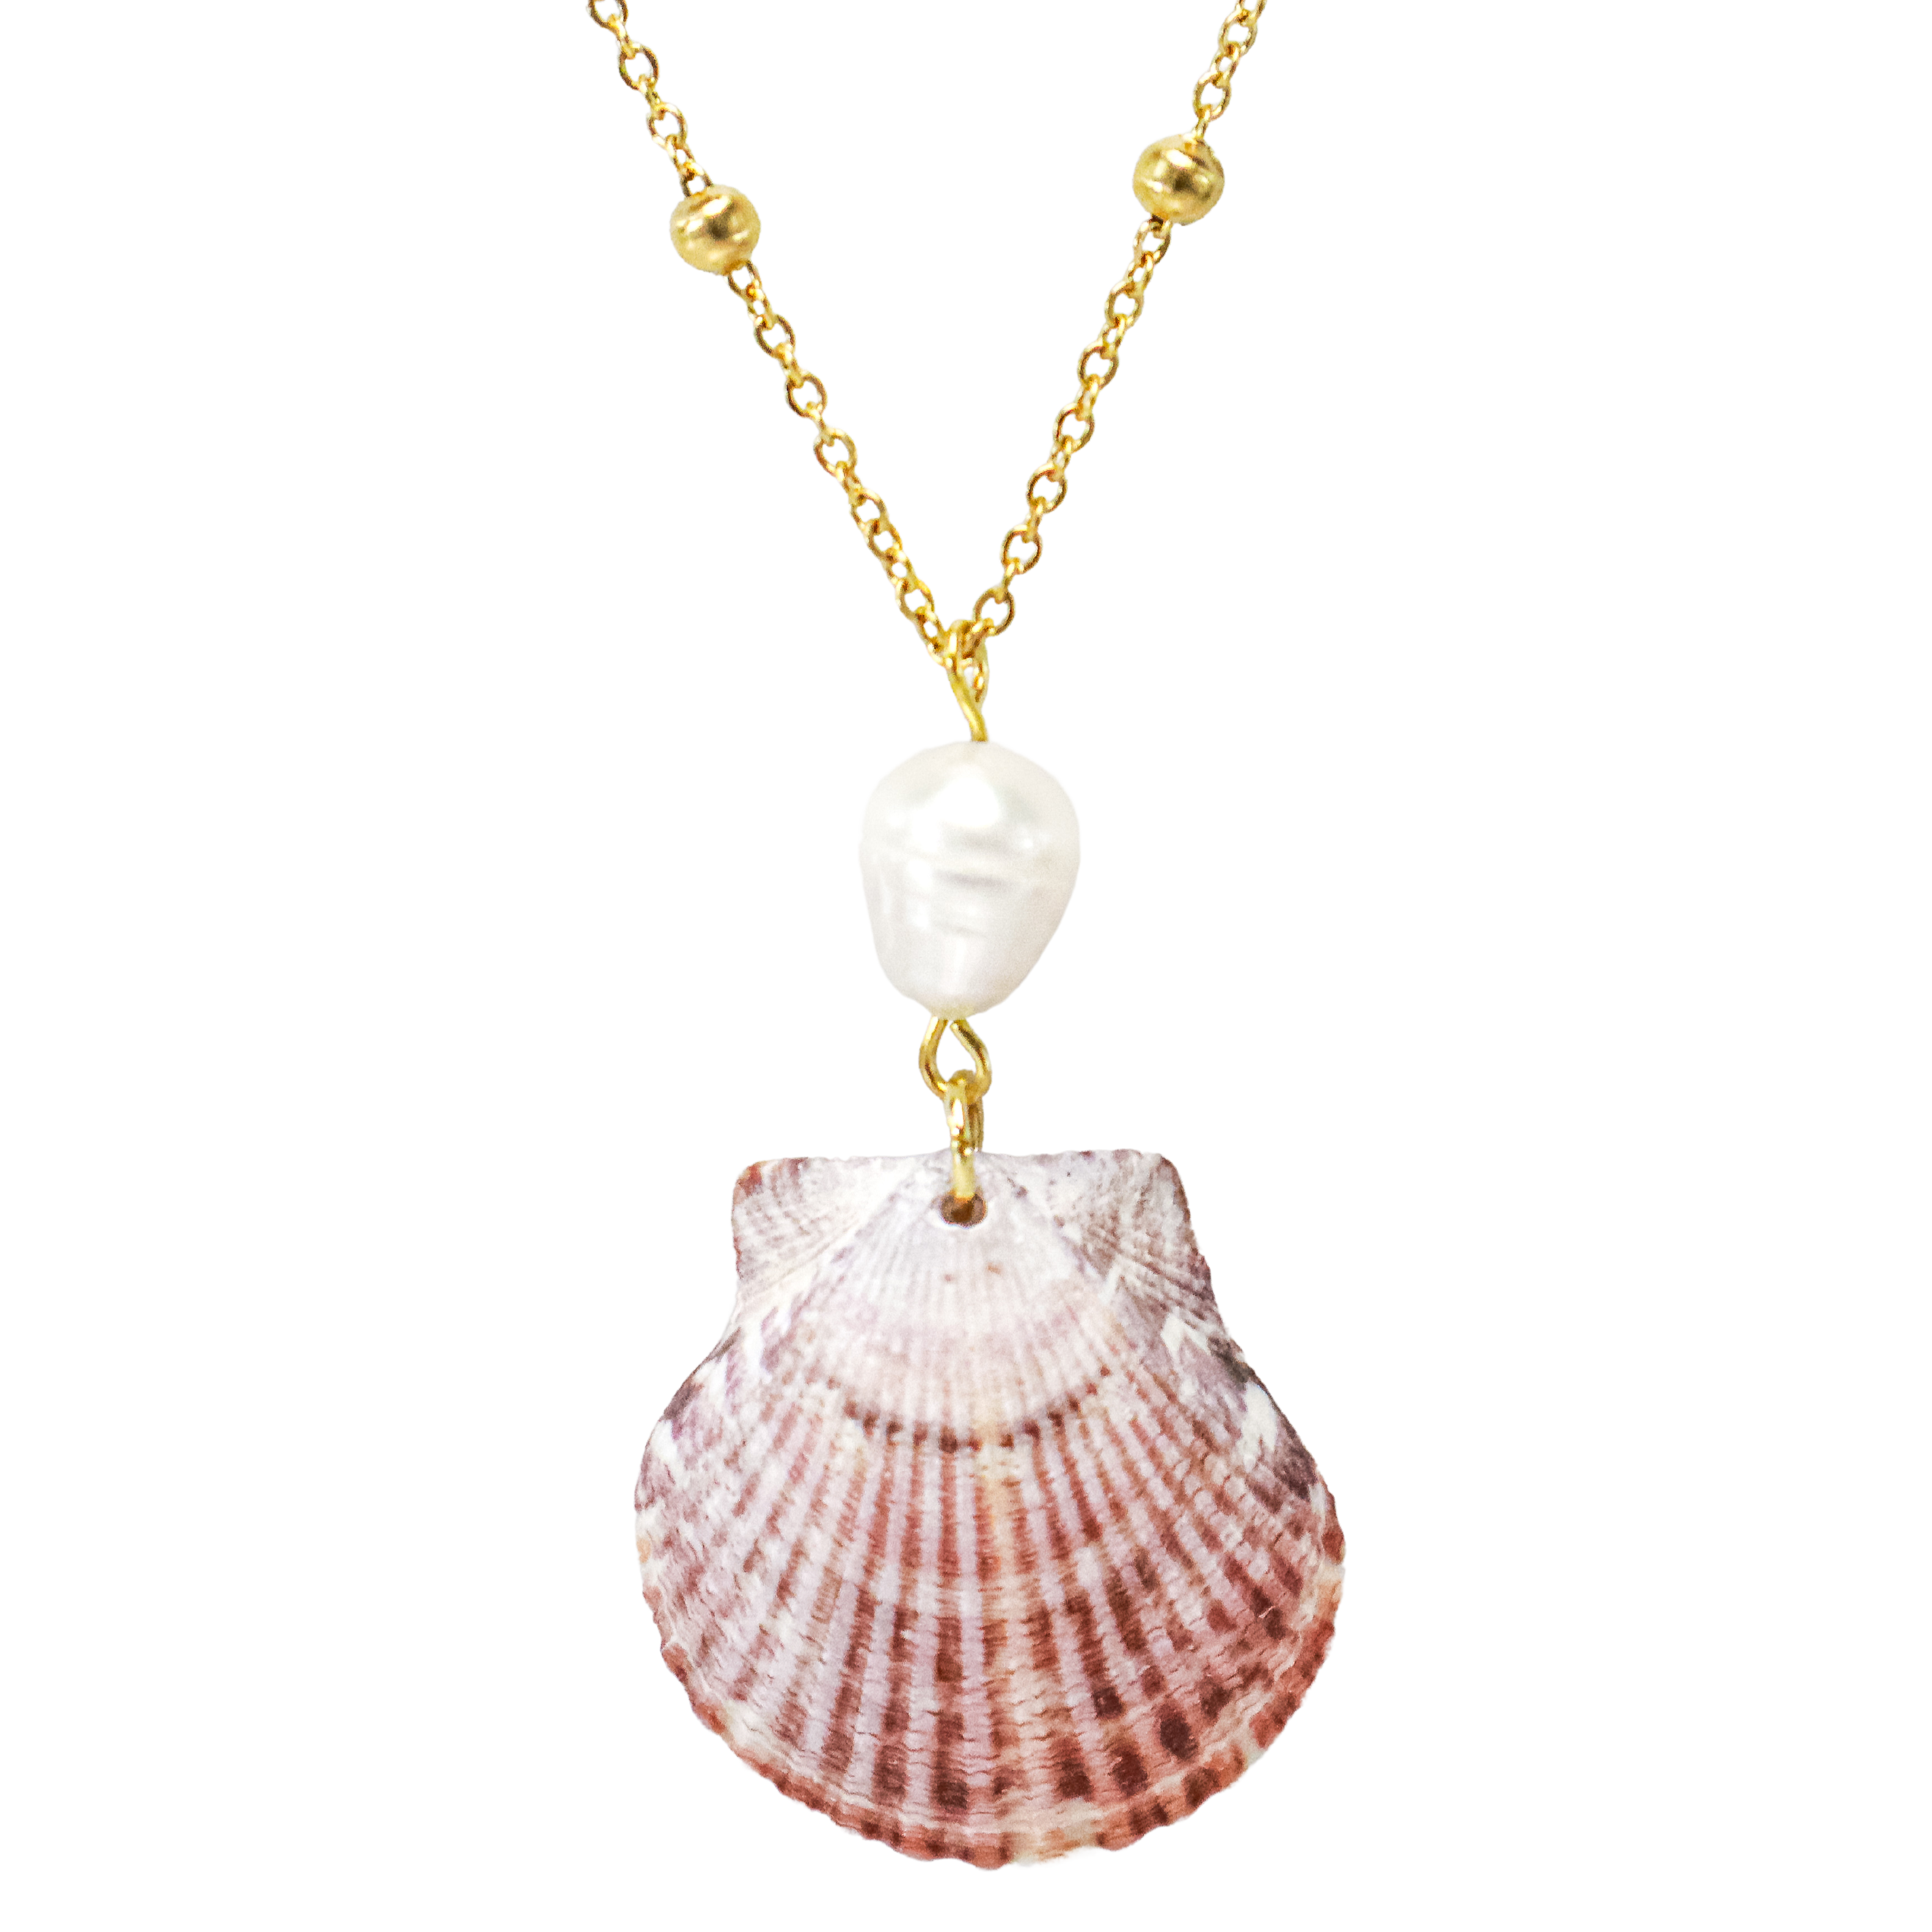 Evie’s Shell Necklace